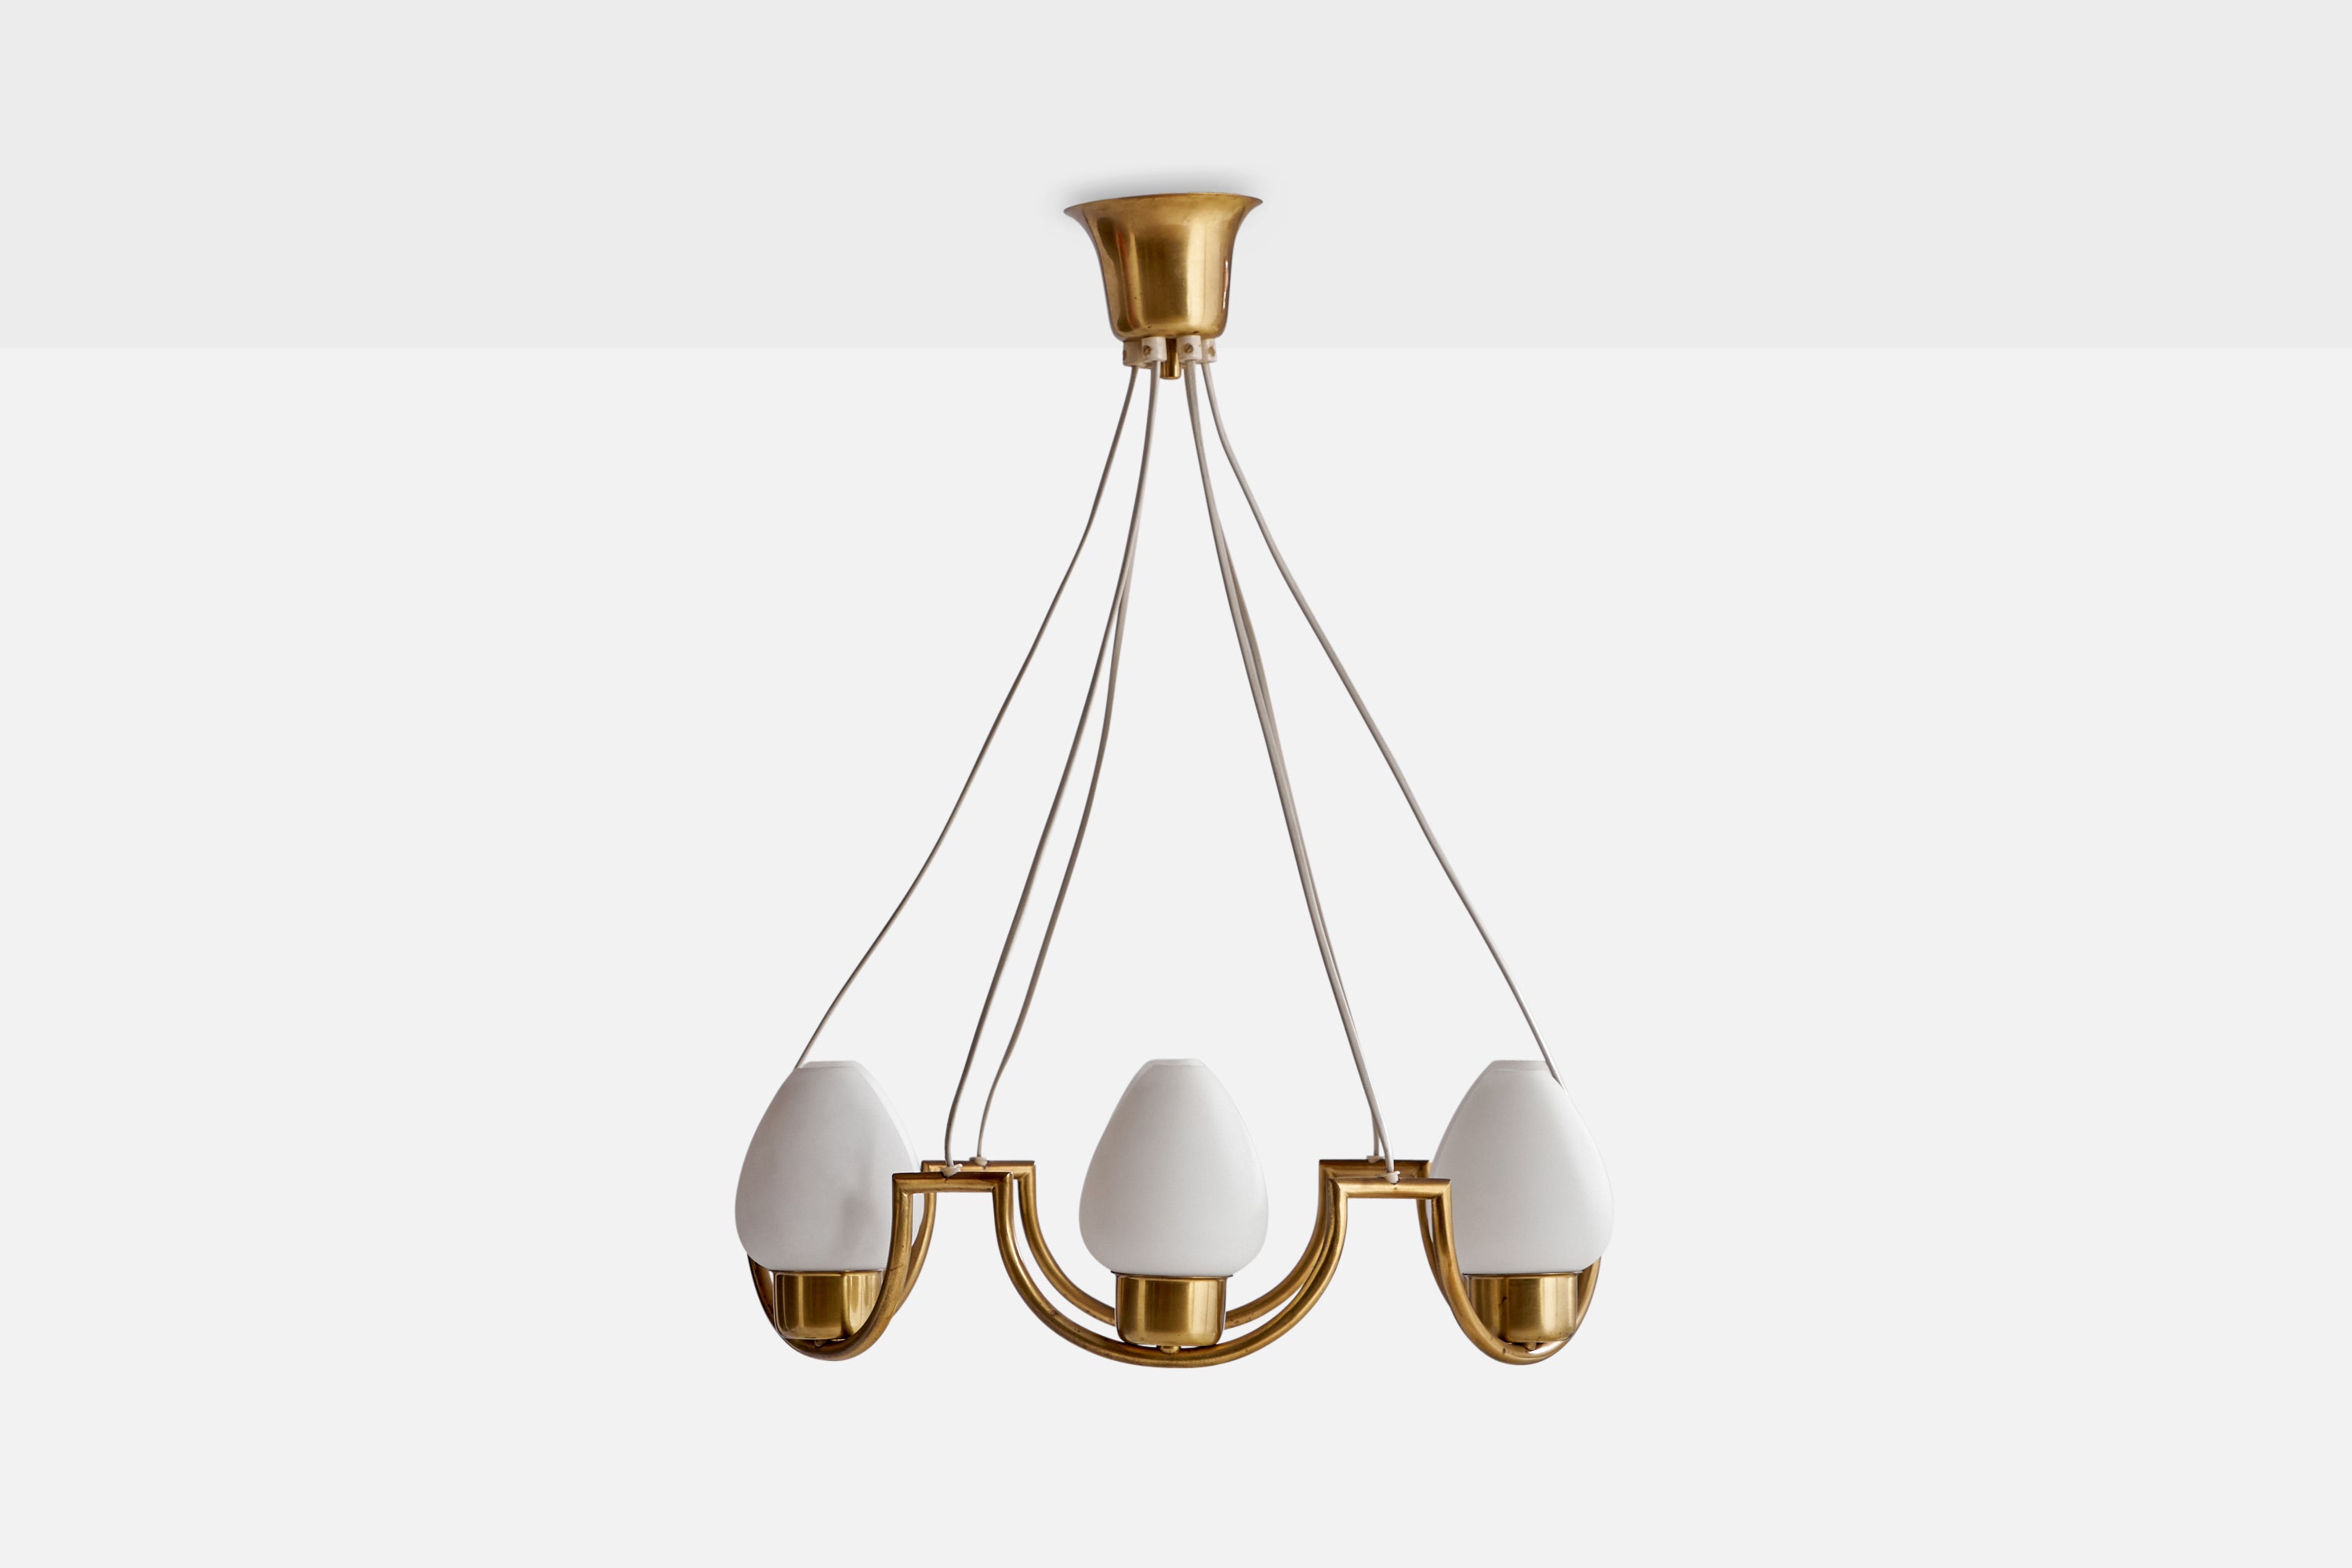 A six-armed brass and opaline glass chandelier designed and produced in Sweden, 1940s.

Dimensions of canopy (inches): 2.75” H x 4”  Diameter
Socket takes standard E-26 bulbs. 5 sockets.There is no maximum wattage stated on the fixture. All lighting